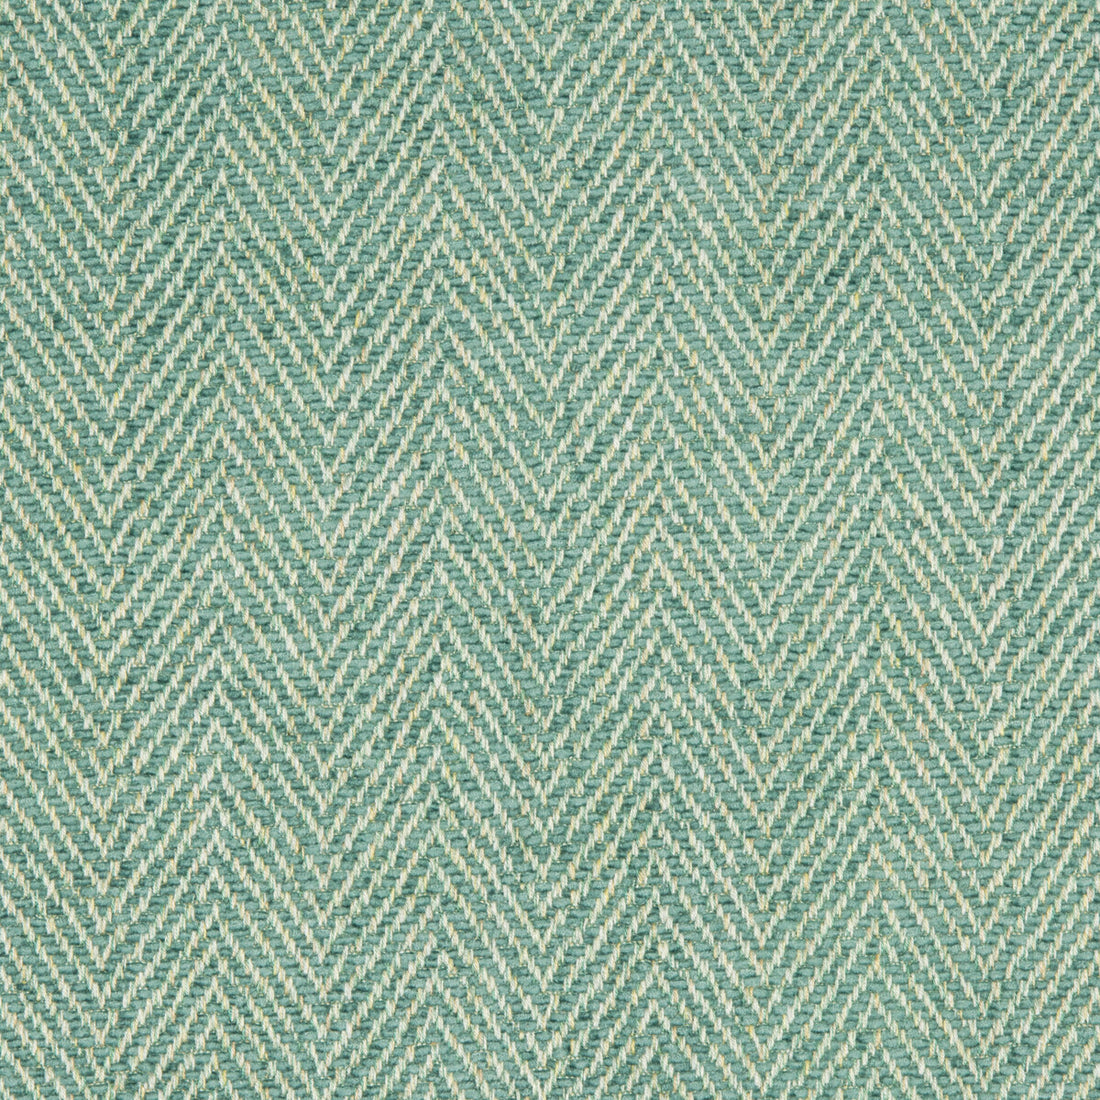 Firle Chenille II fabric in aqua color - pattern 8017140.13.0 - by Brunschwig &amp; Fils in the Baronet collection